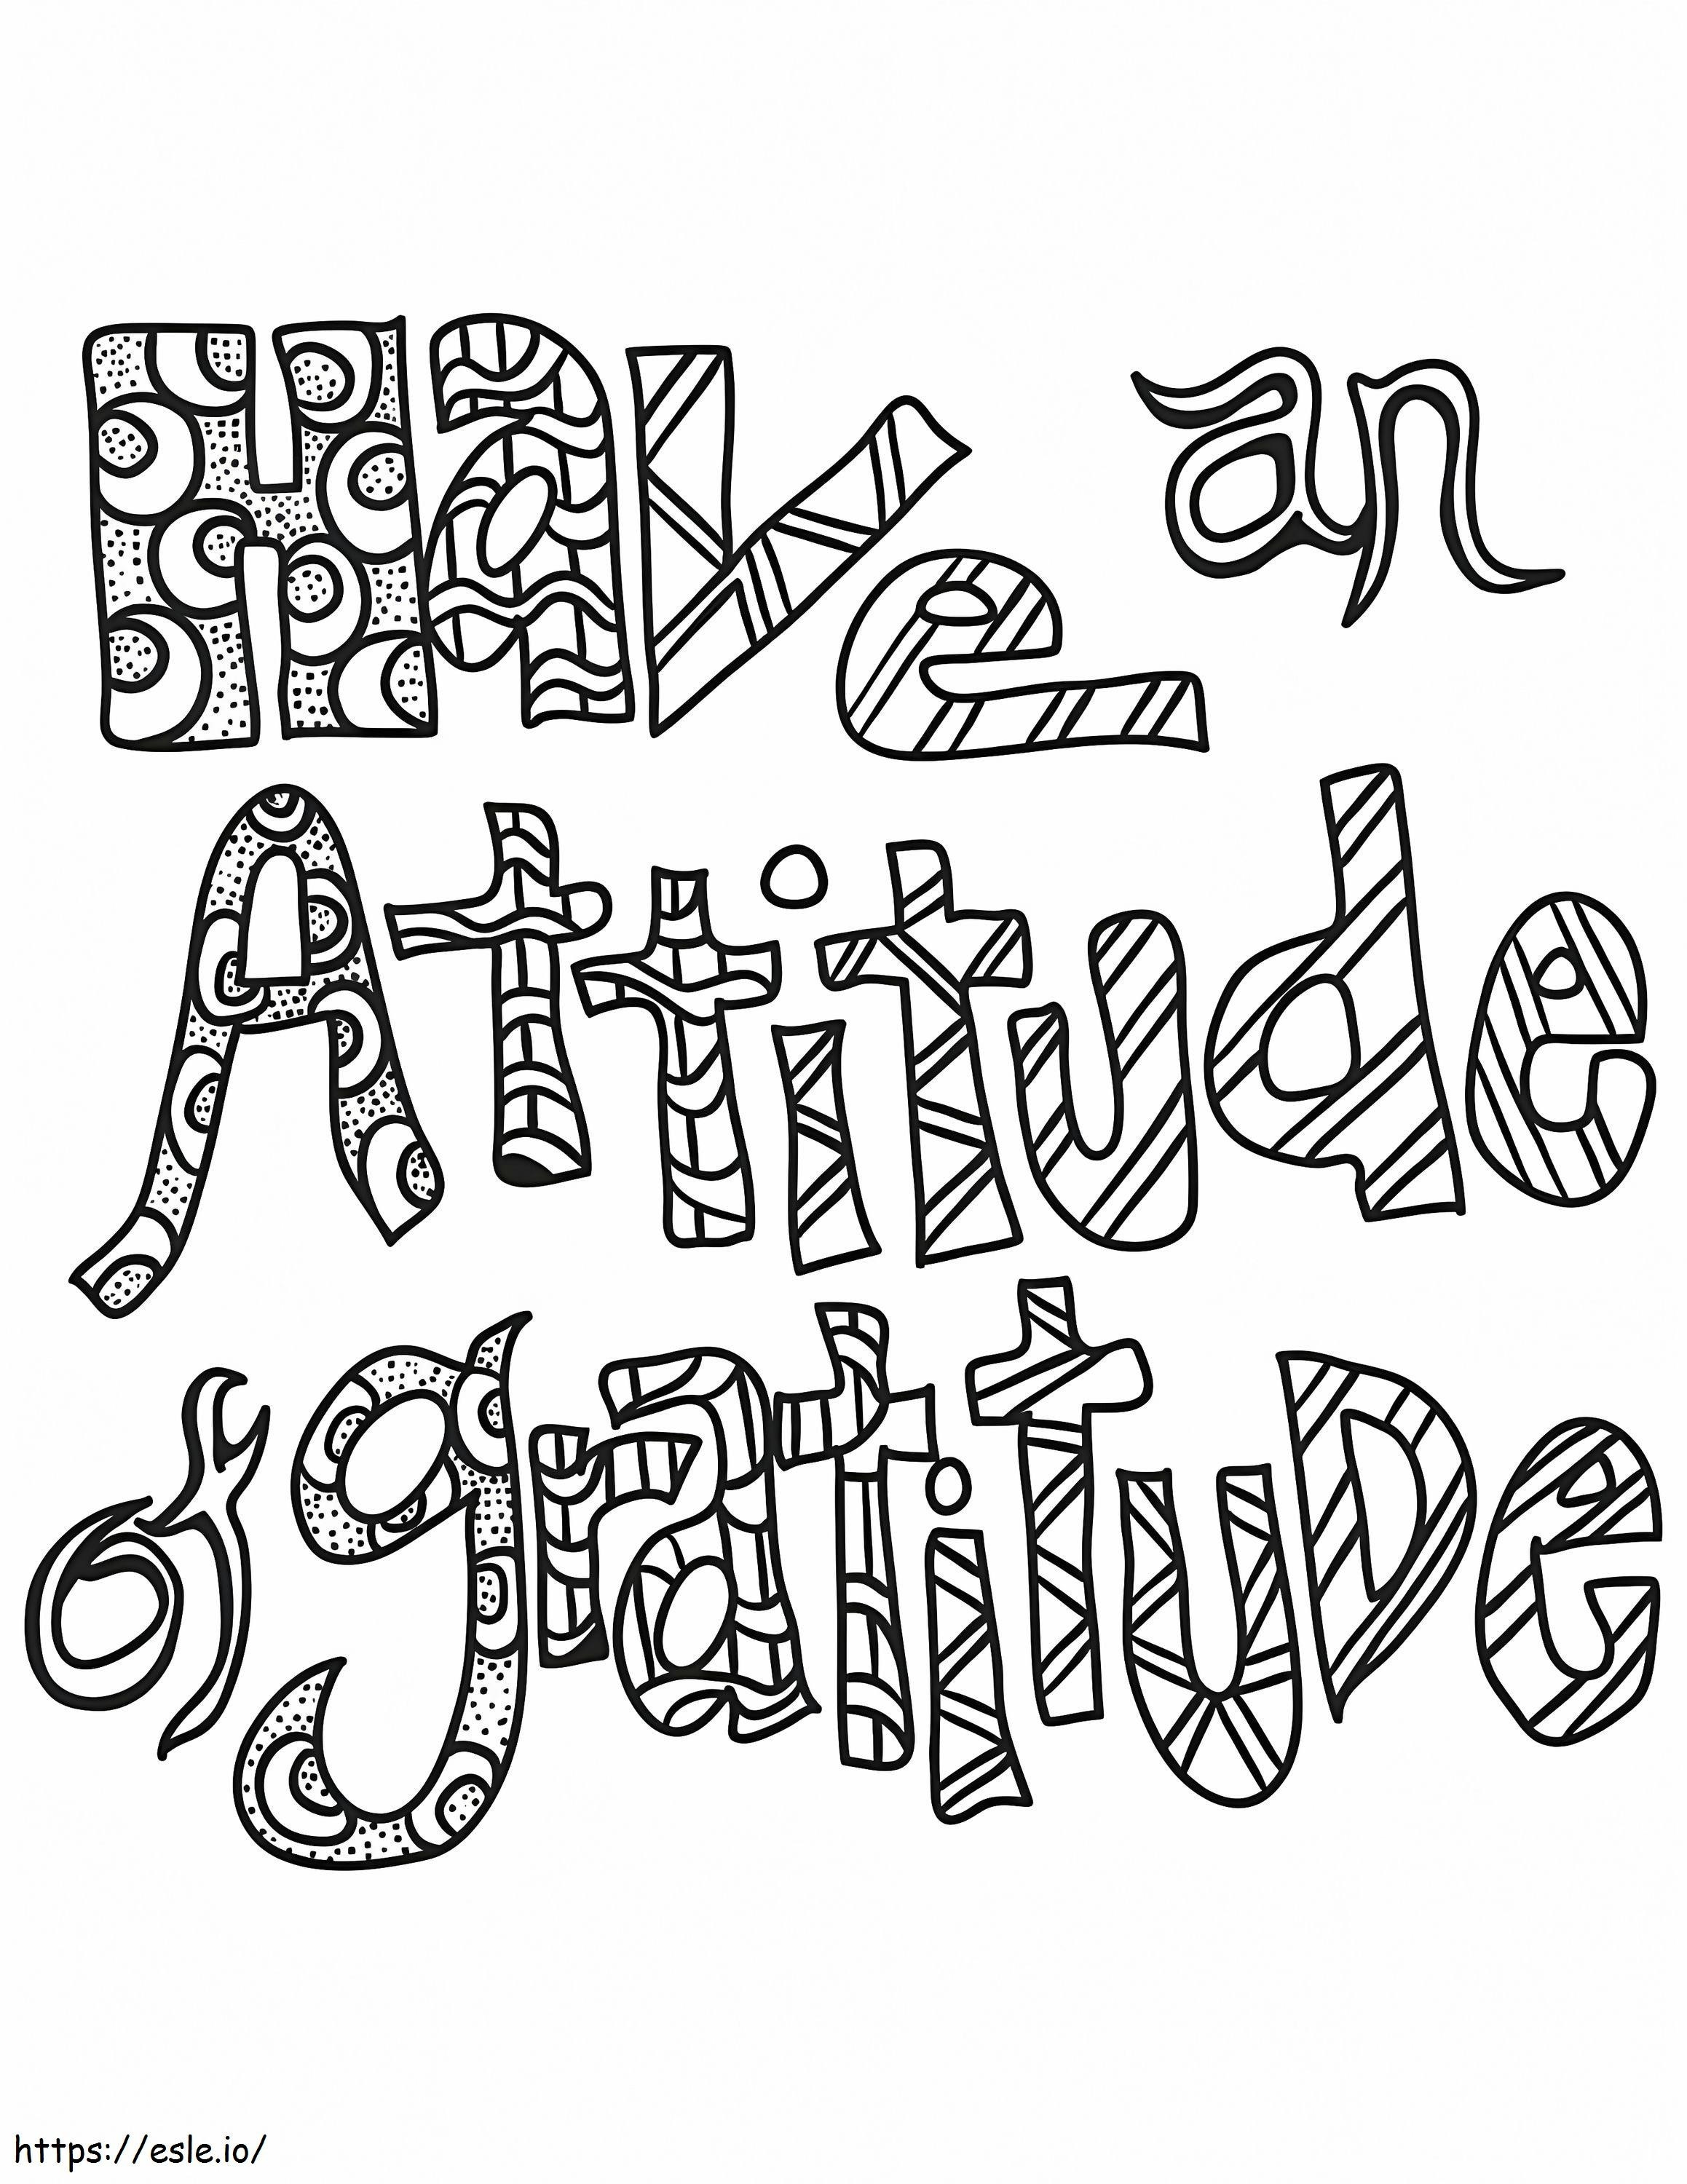 Have An Attitude Of Gratitude coloring page